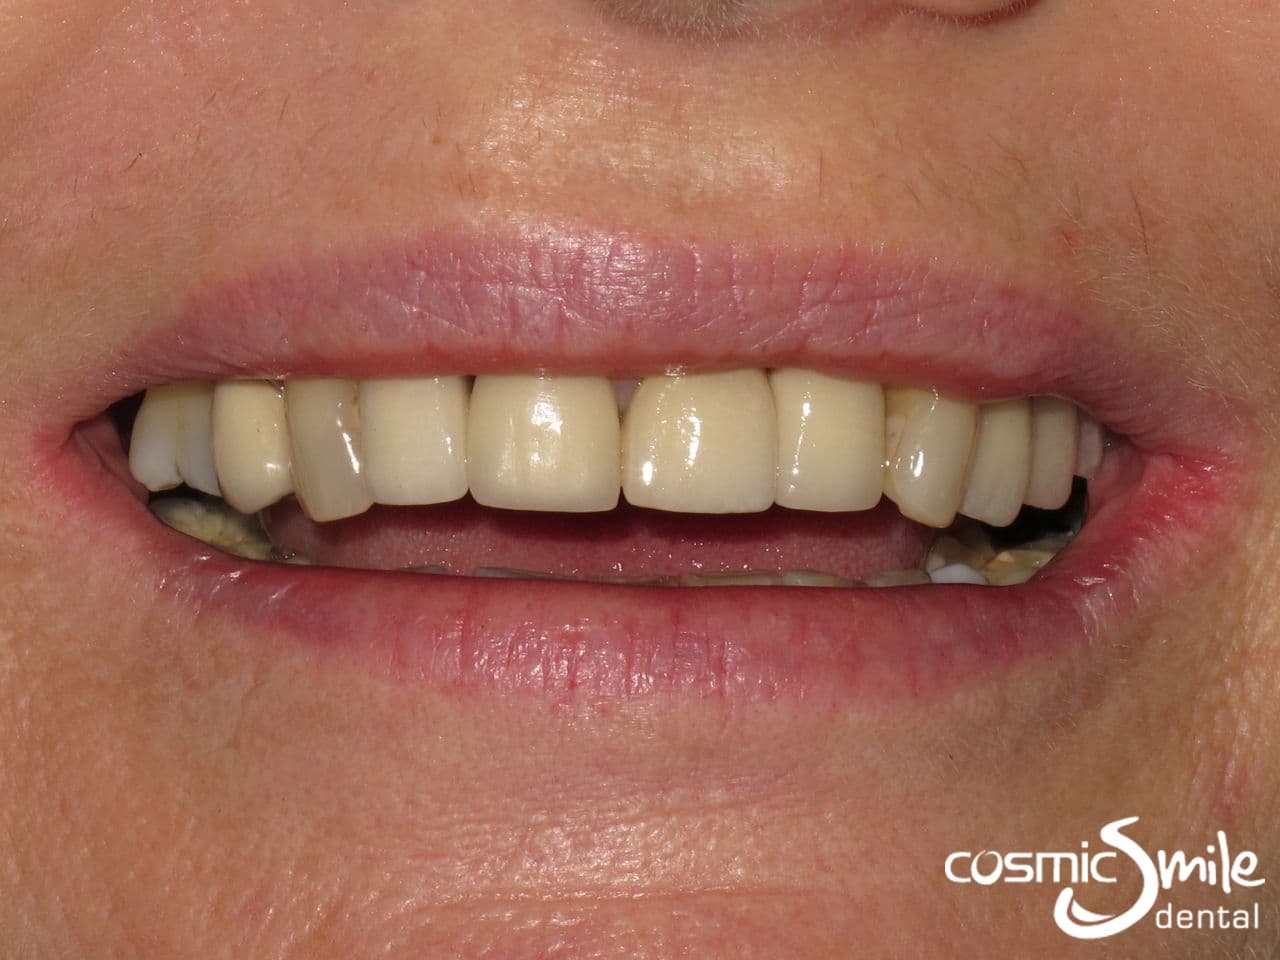 Smile with dental implants in place